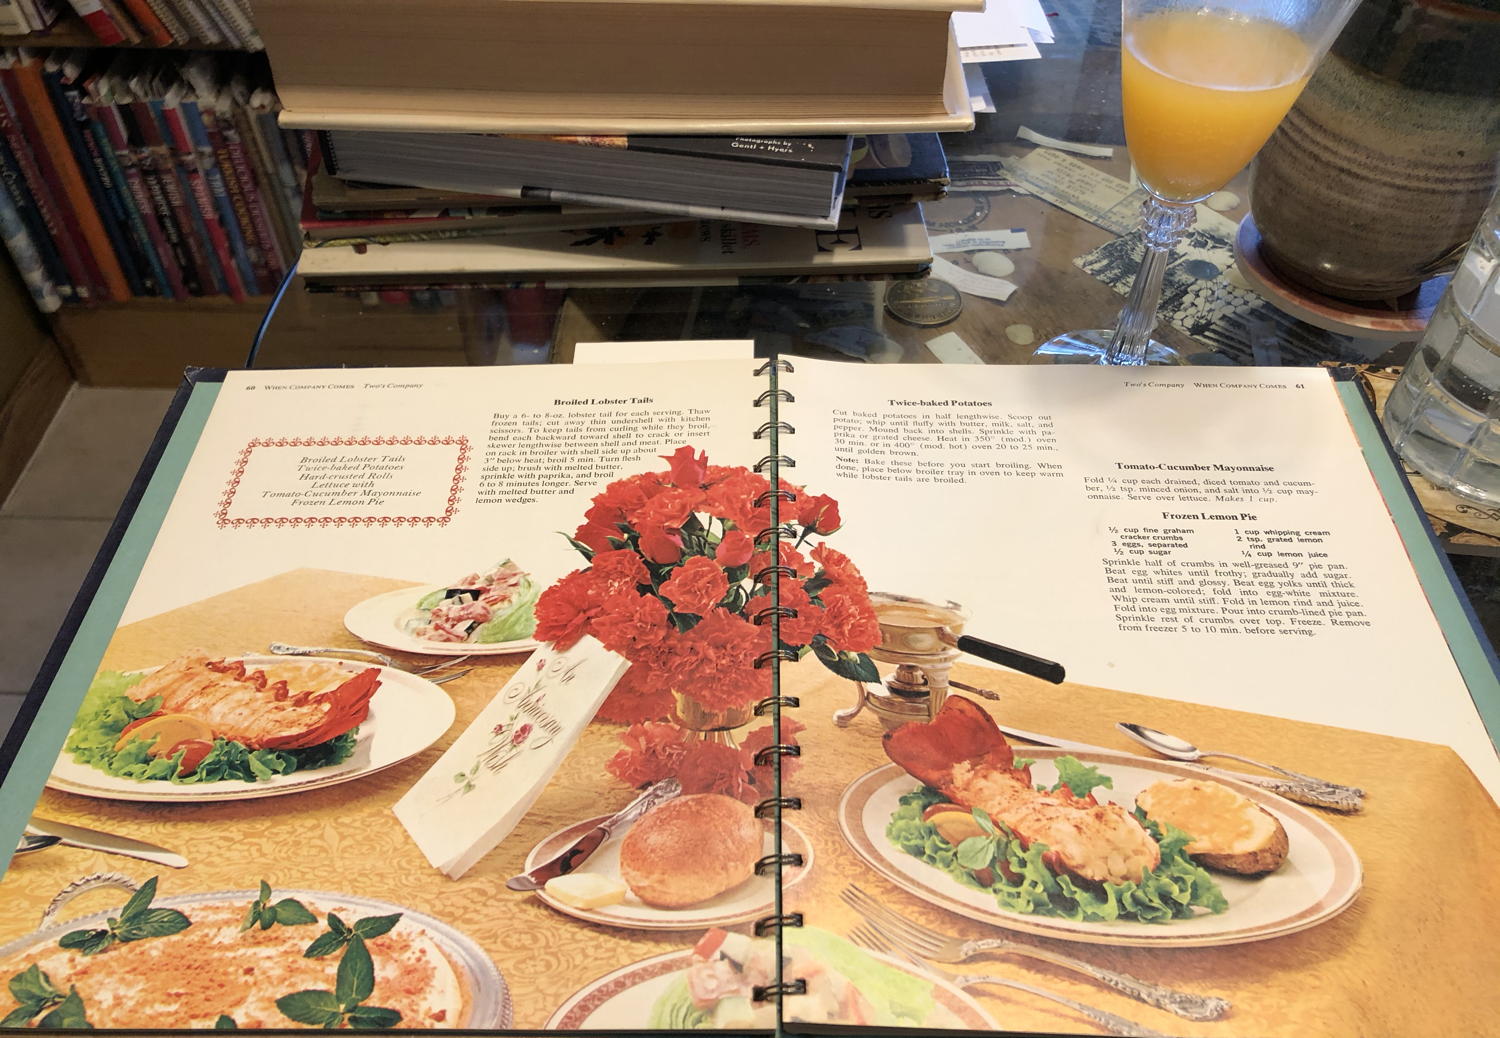 Two’s Company: Betty Crocker’s “two’s company” spread for when the company coming is your spouse.; cookbooks; seafood; pie